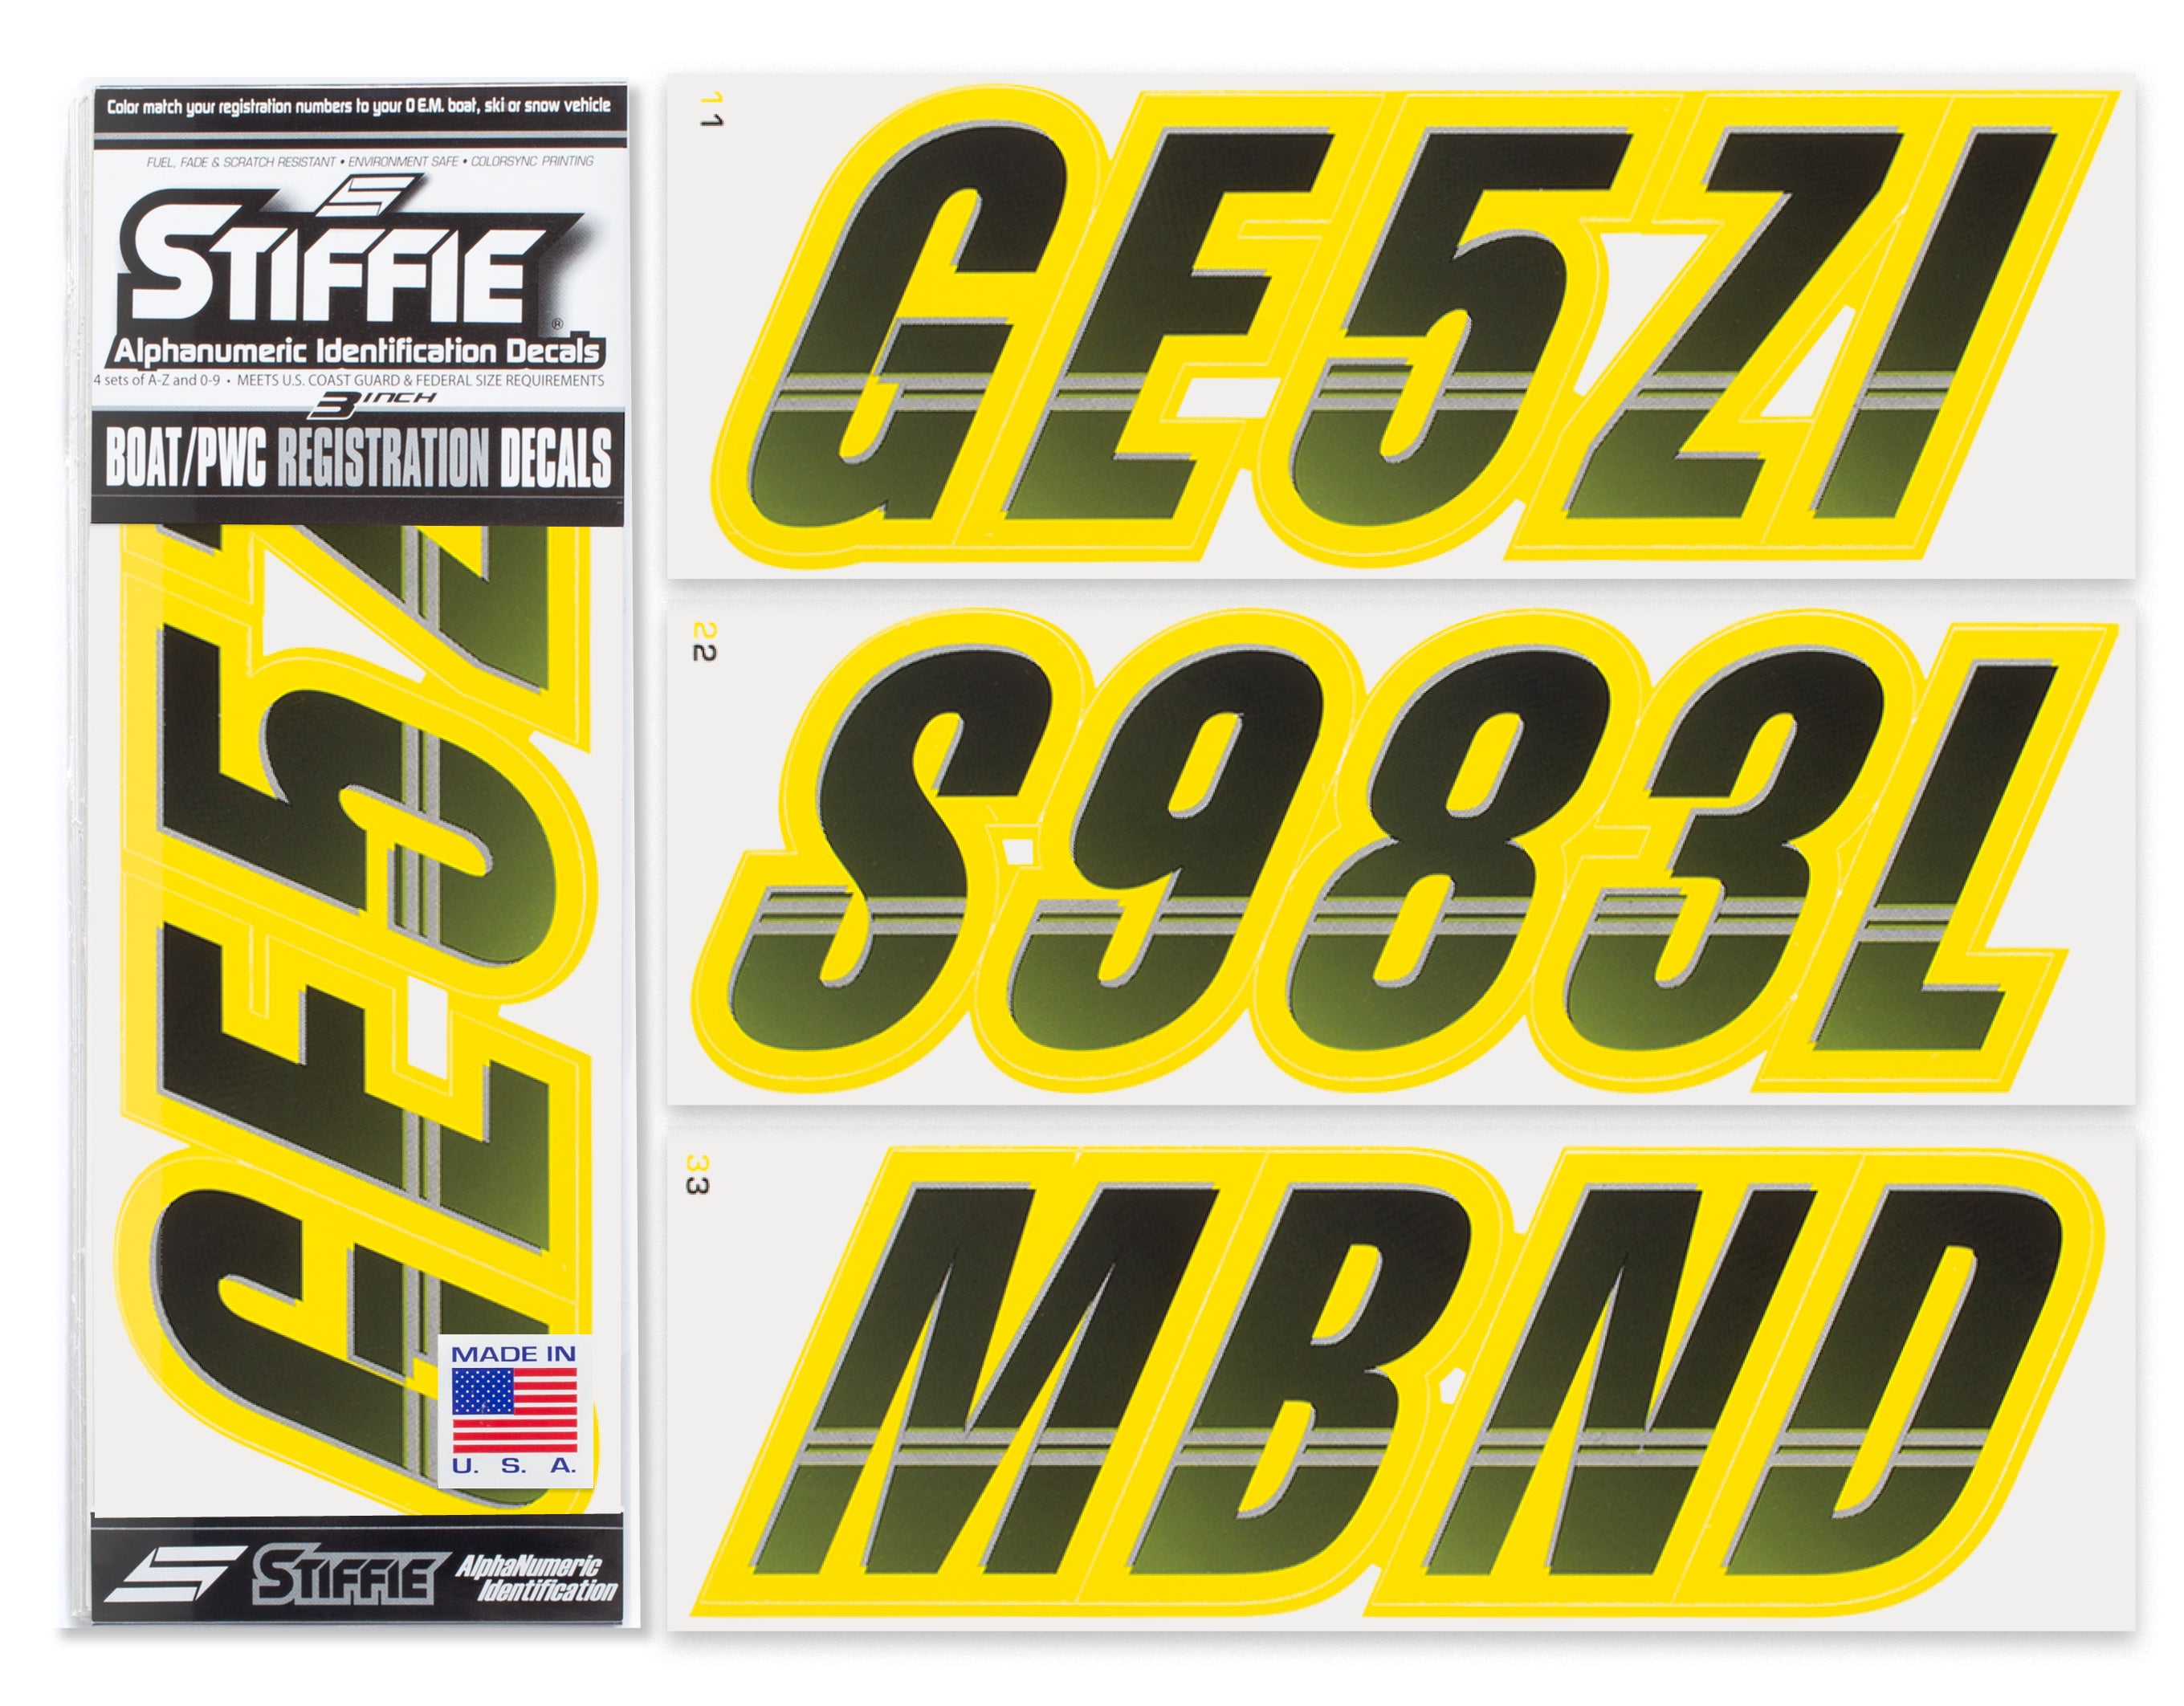 STIFFIE Techtron Black/Electric Yellow 3" Alpha-Numeric Registration Identification Numbers Stickers Decals for Boats & Personal Watercraft